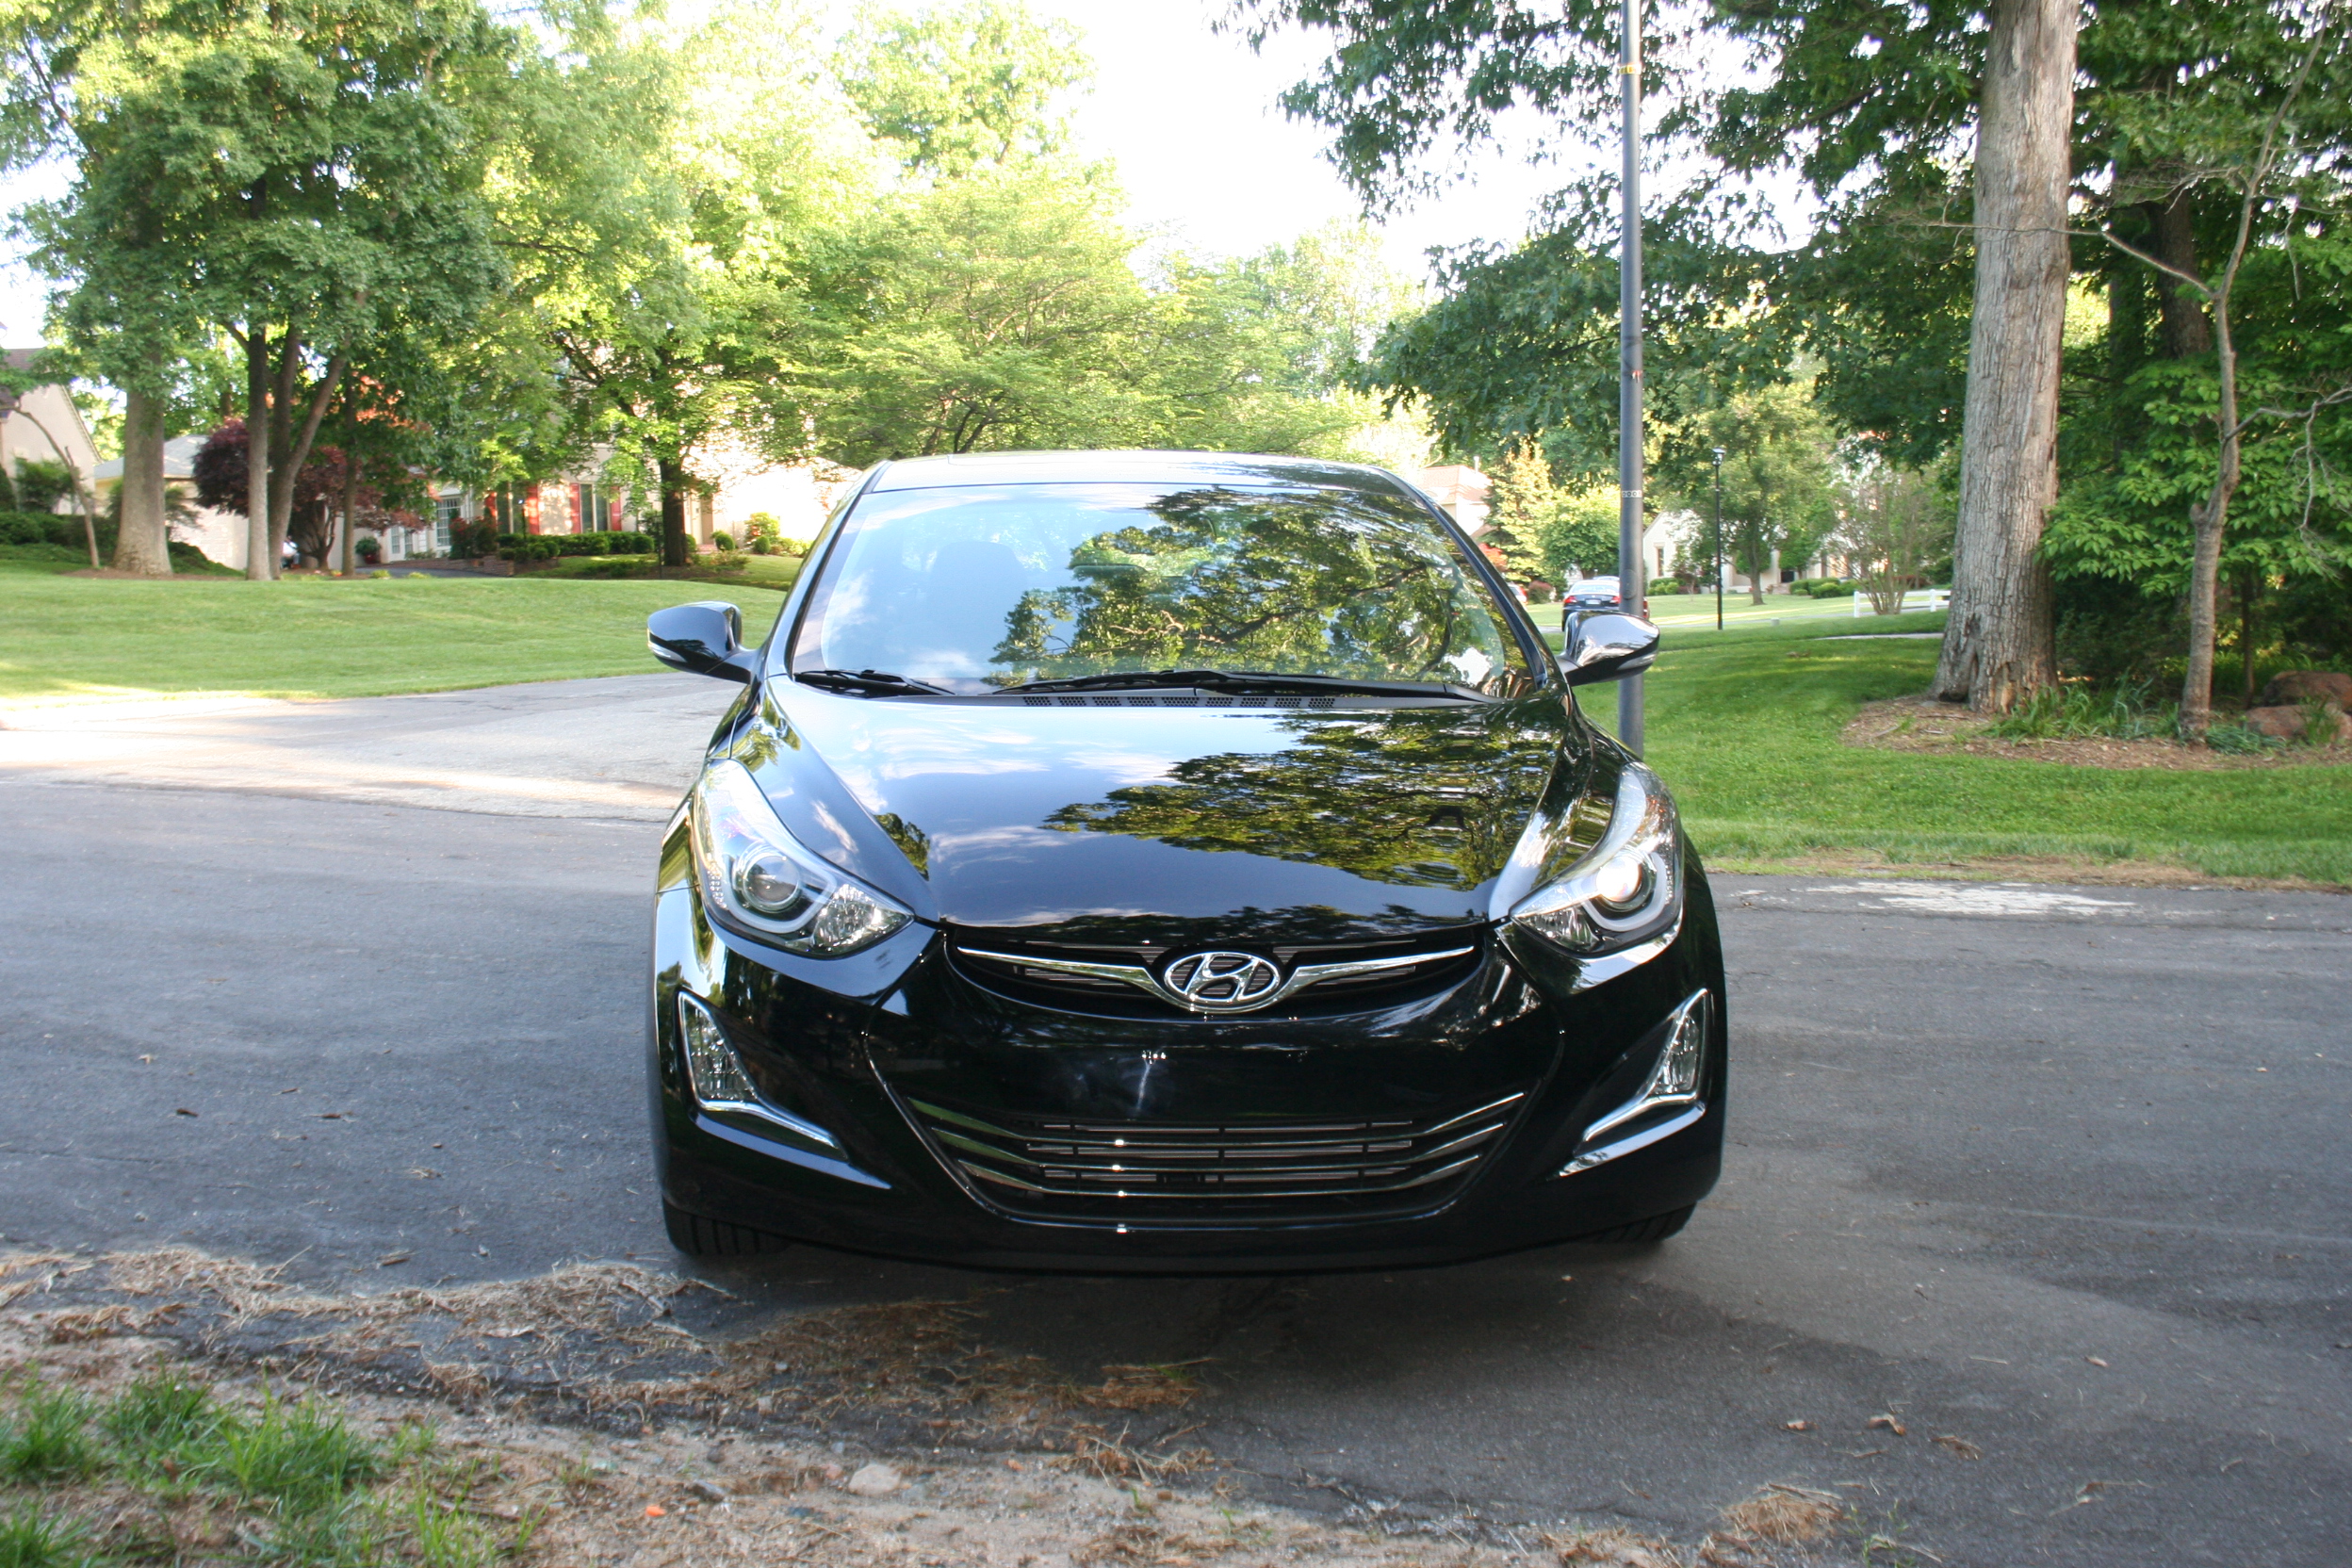 Car Report: 2014 Hyundai Elantra Limited is packed with features at decent price